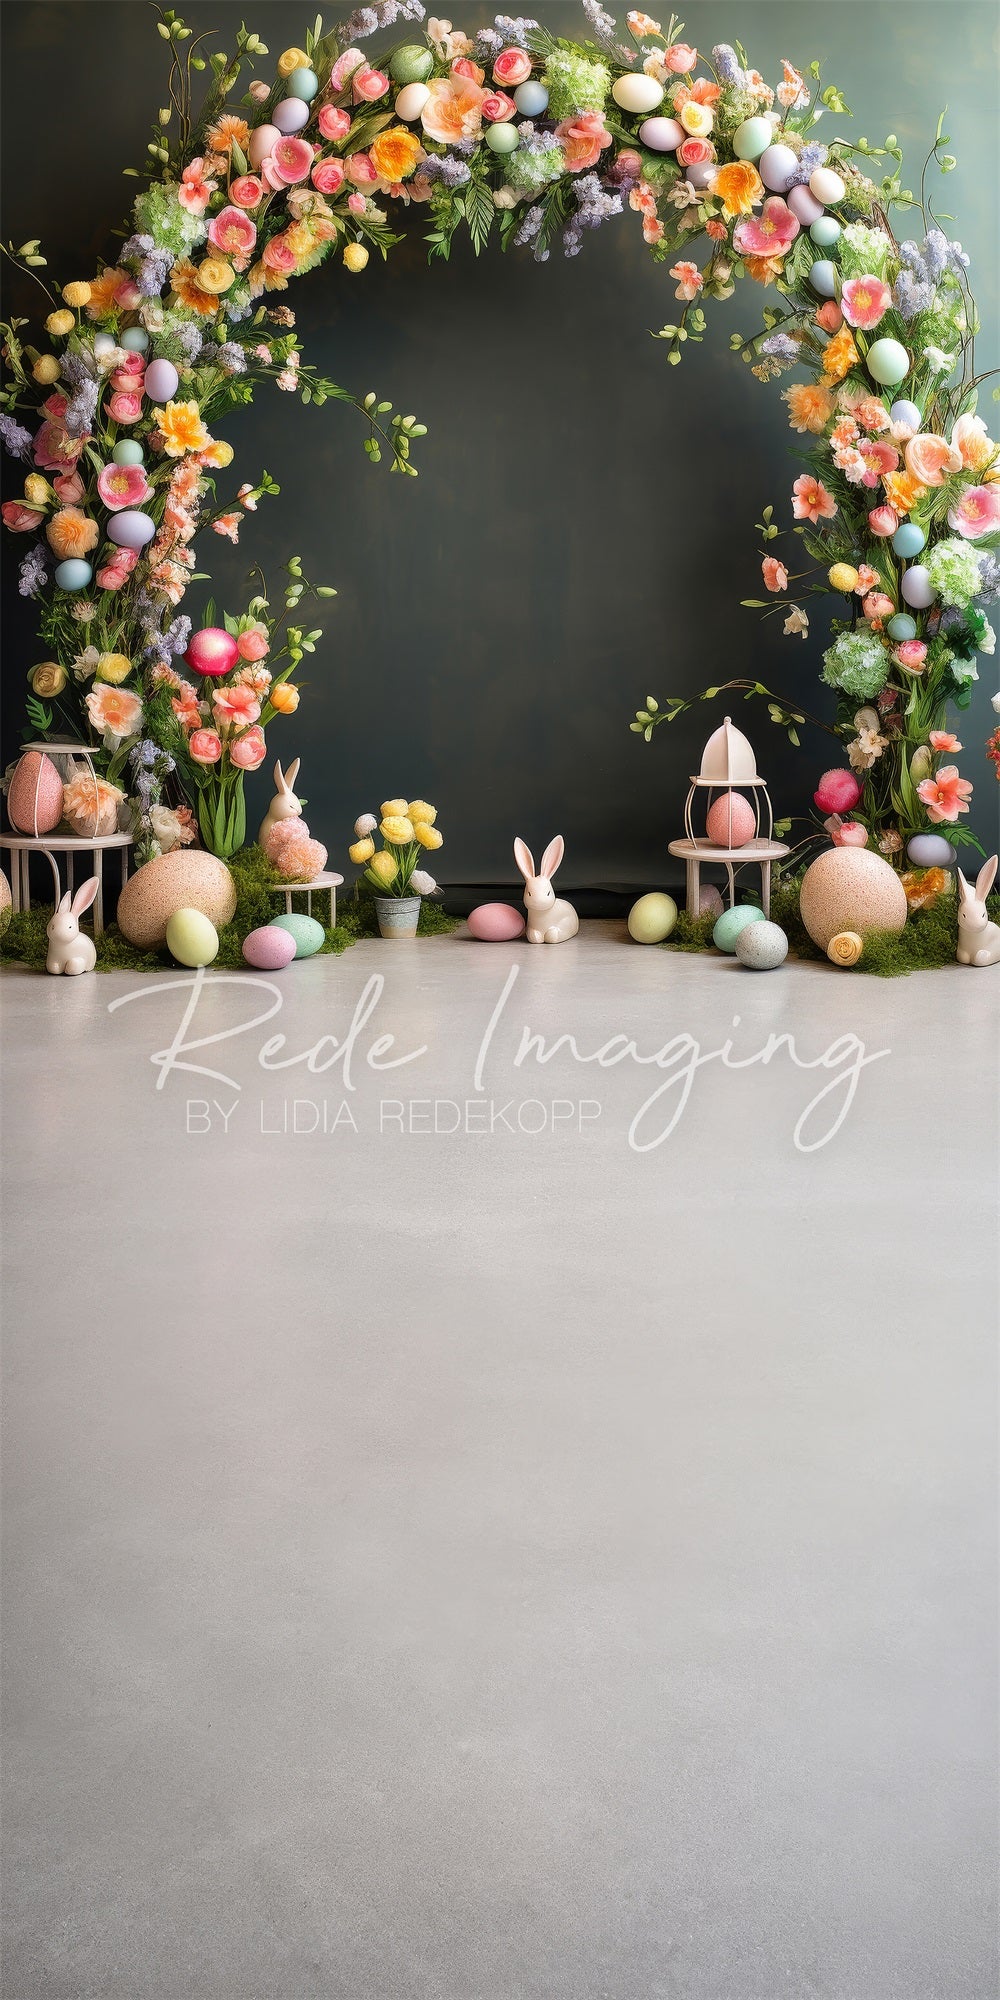 Kate Eggciting Arch Sweep Backdrop Designed by Lidia Redekopp